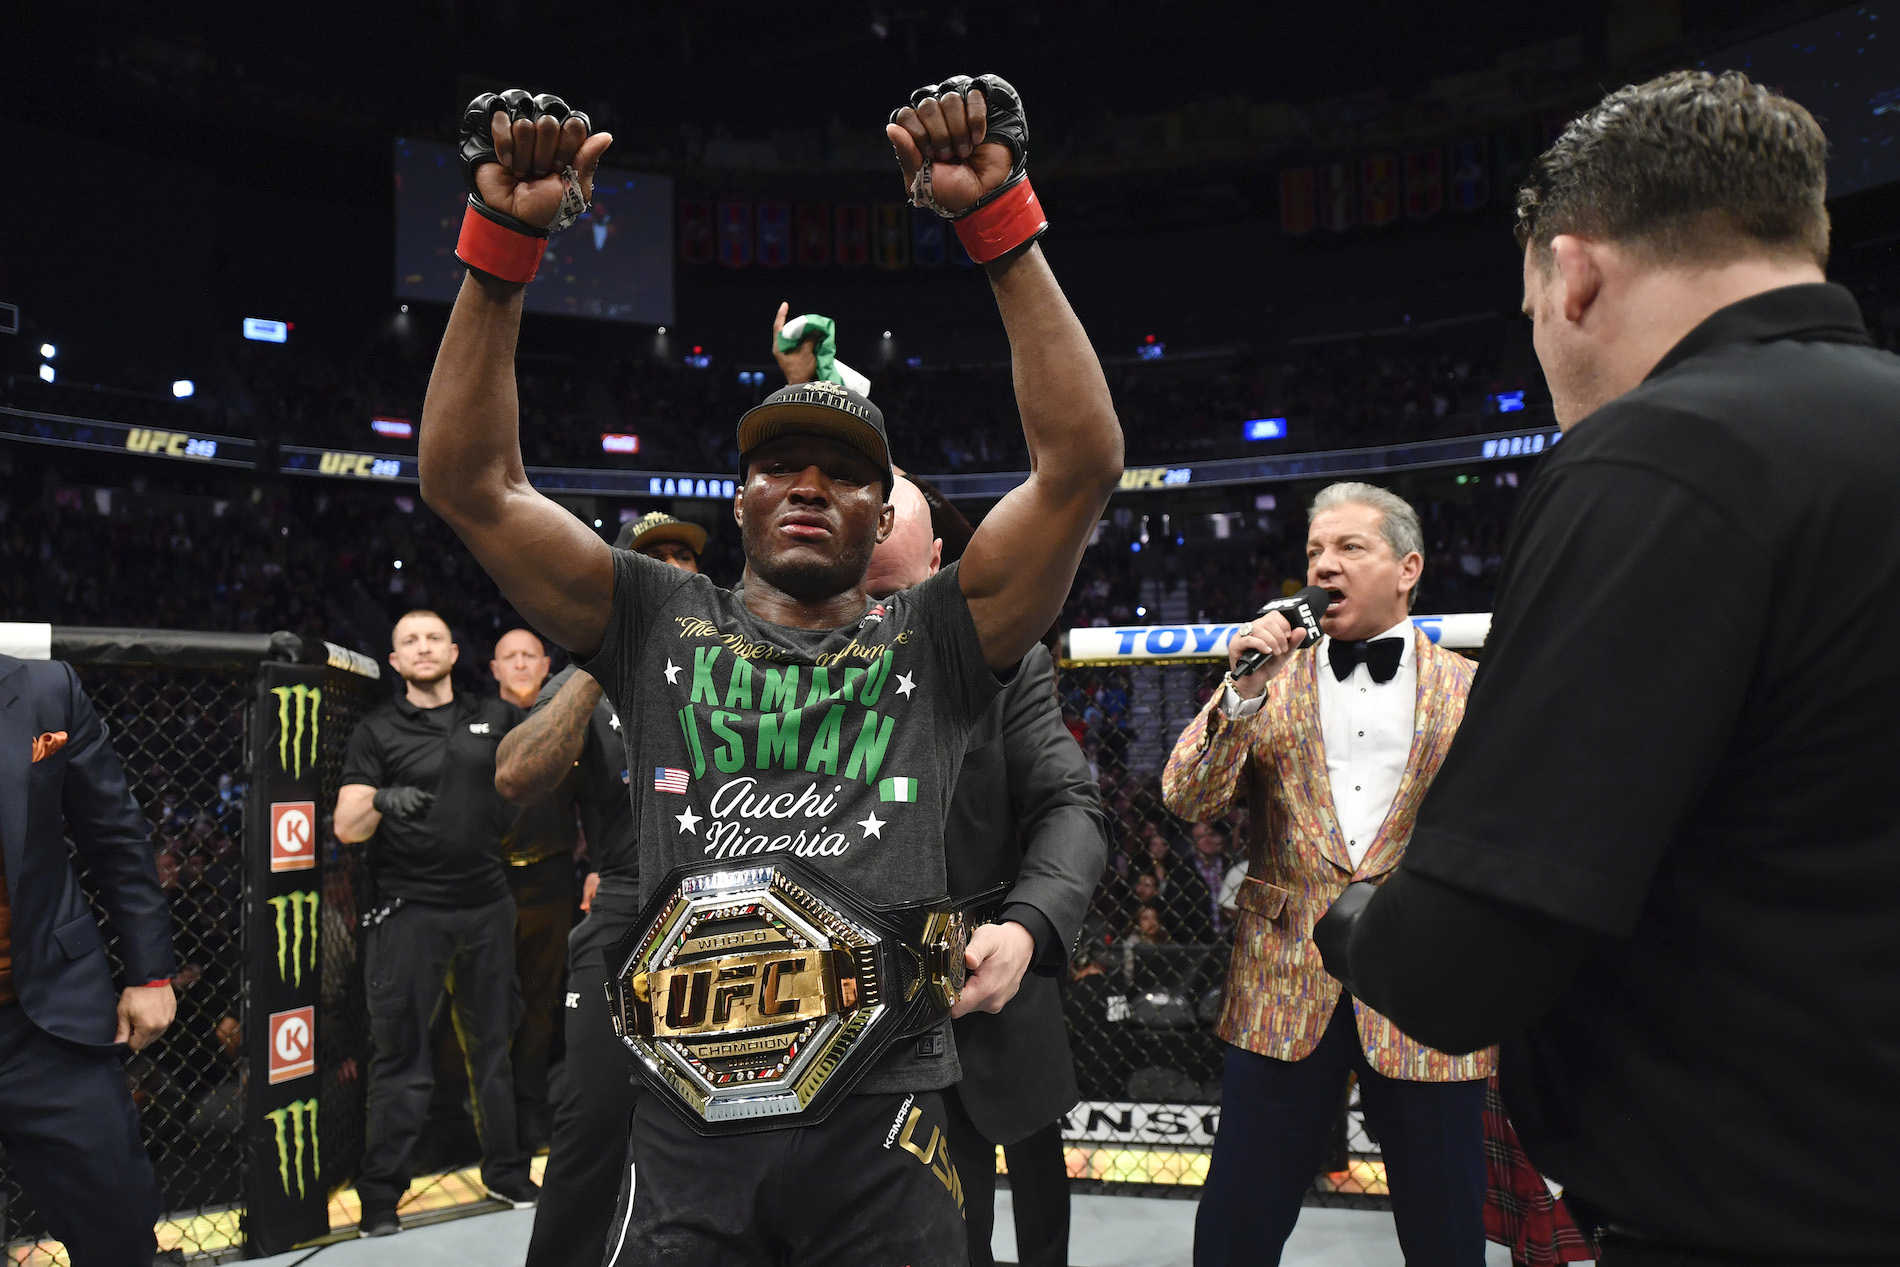 Kamaru Usman's path to glory was an unlikely one, but he battled adversity in Nigeria and escaped alive to become a UFC champion.